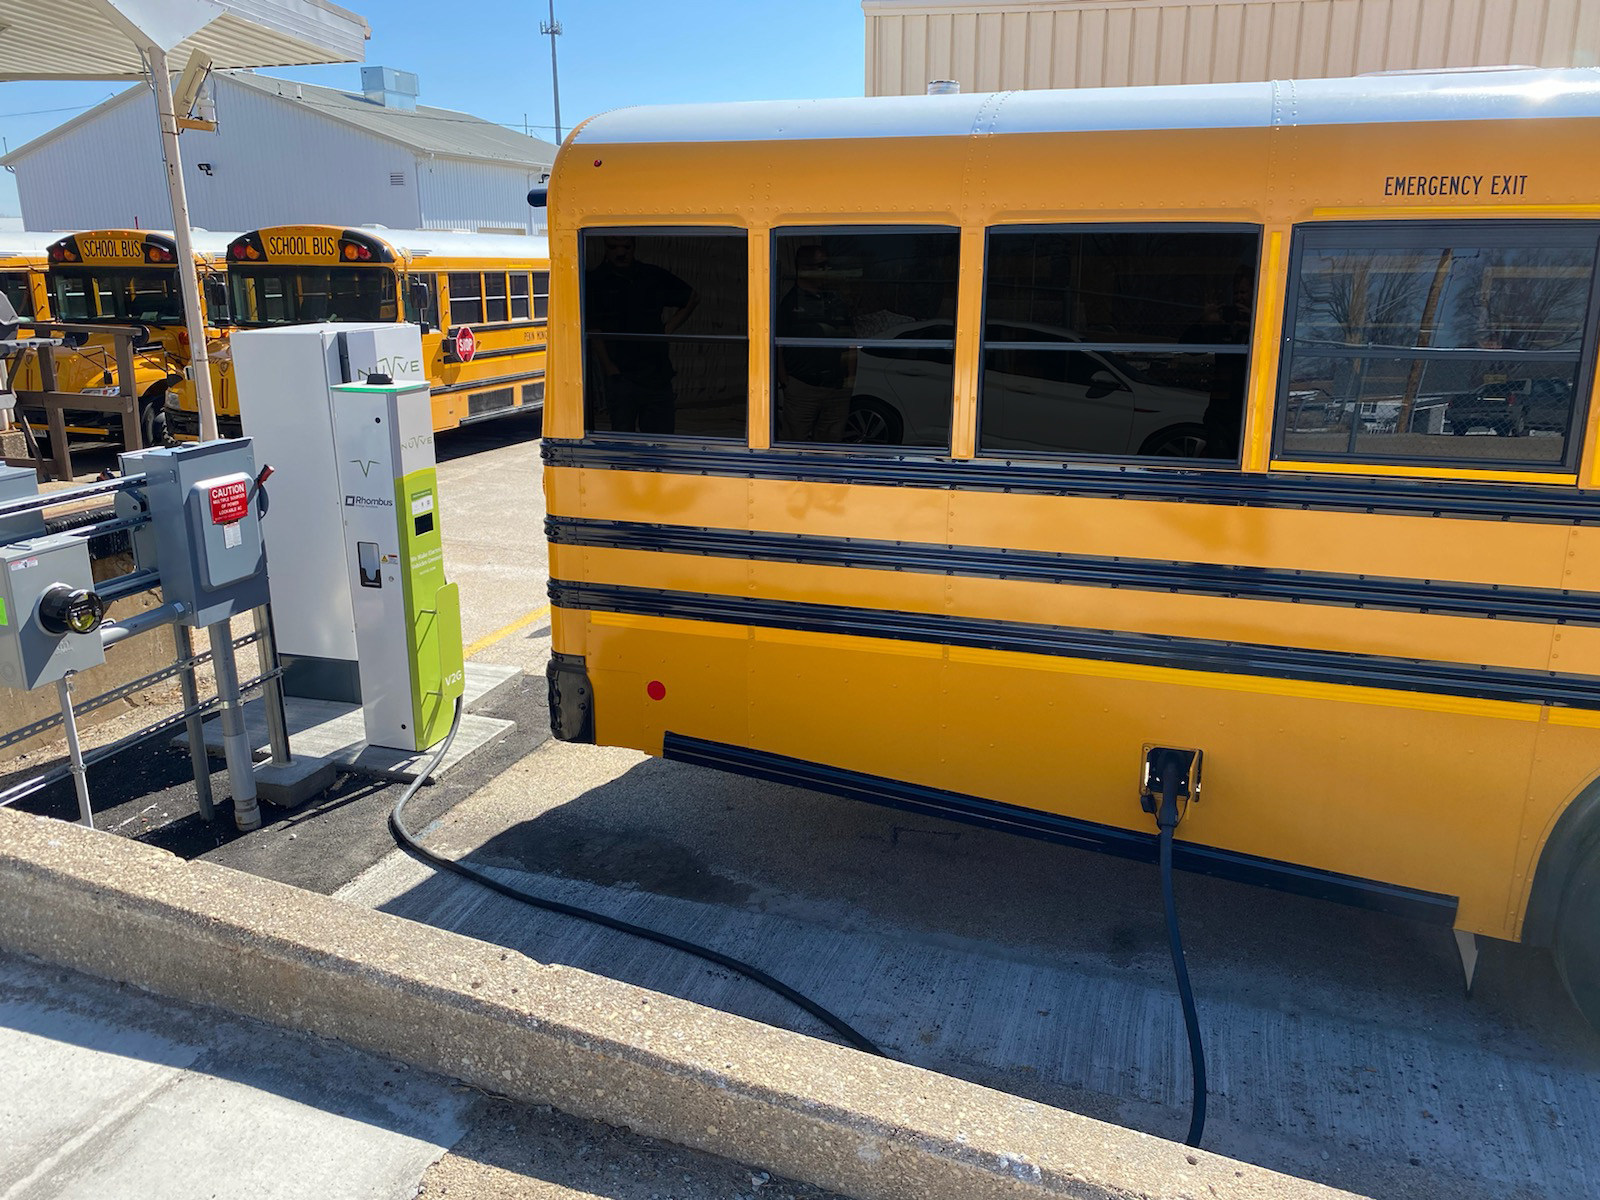 Nuvve DC V2G Charging Station from Rhombus Energy Solutions charging a Blue Bird school bus.